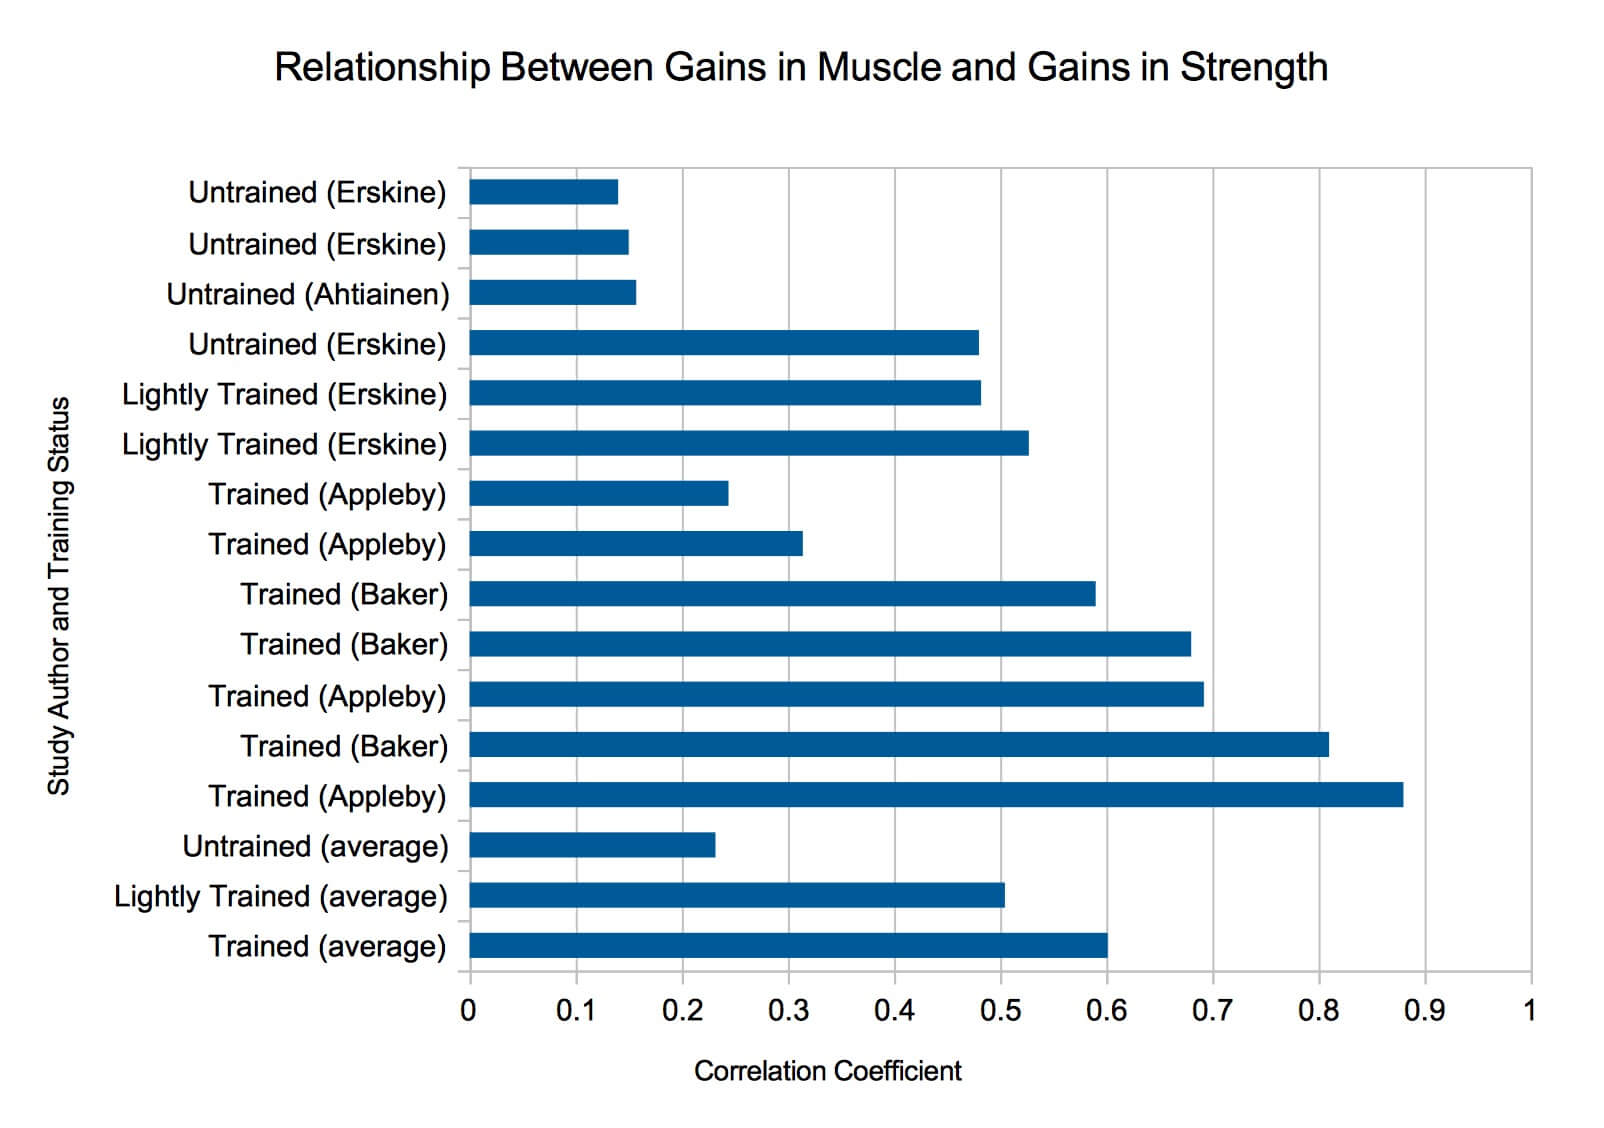 As you can see, in studies with more experienced participants, the relationship between muscle gains and strength gains tends to be stronger.